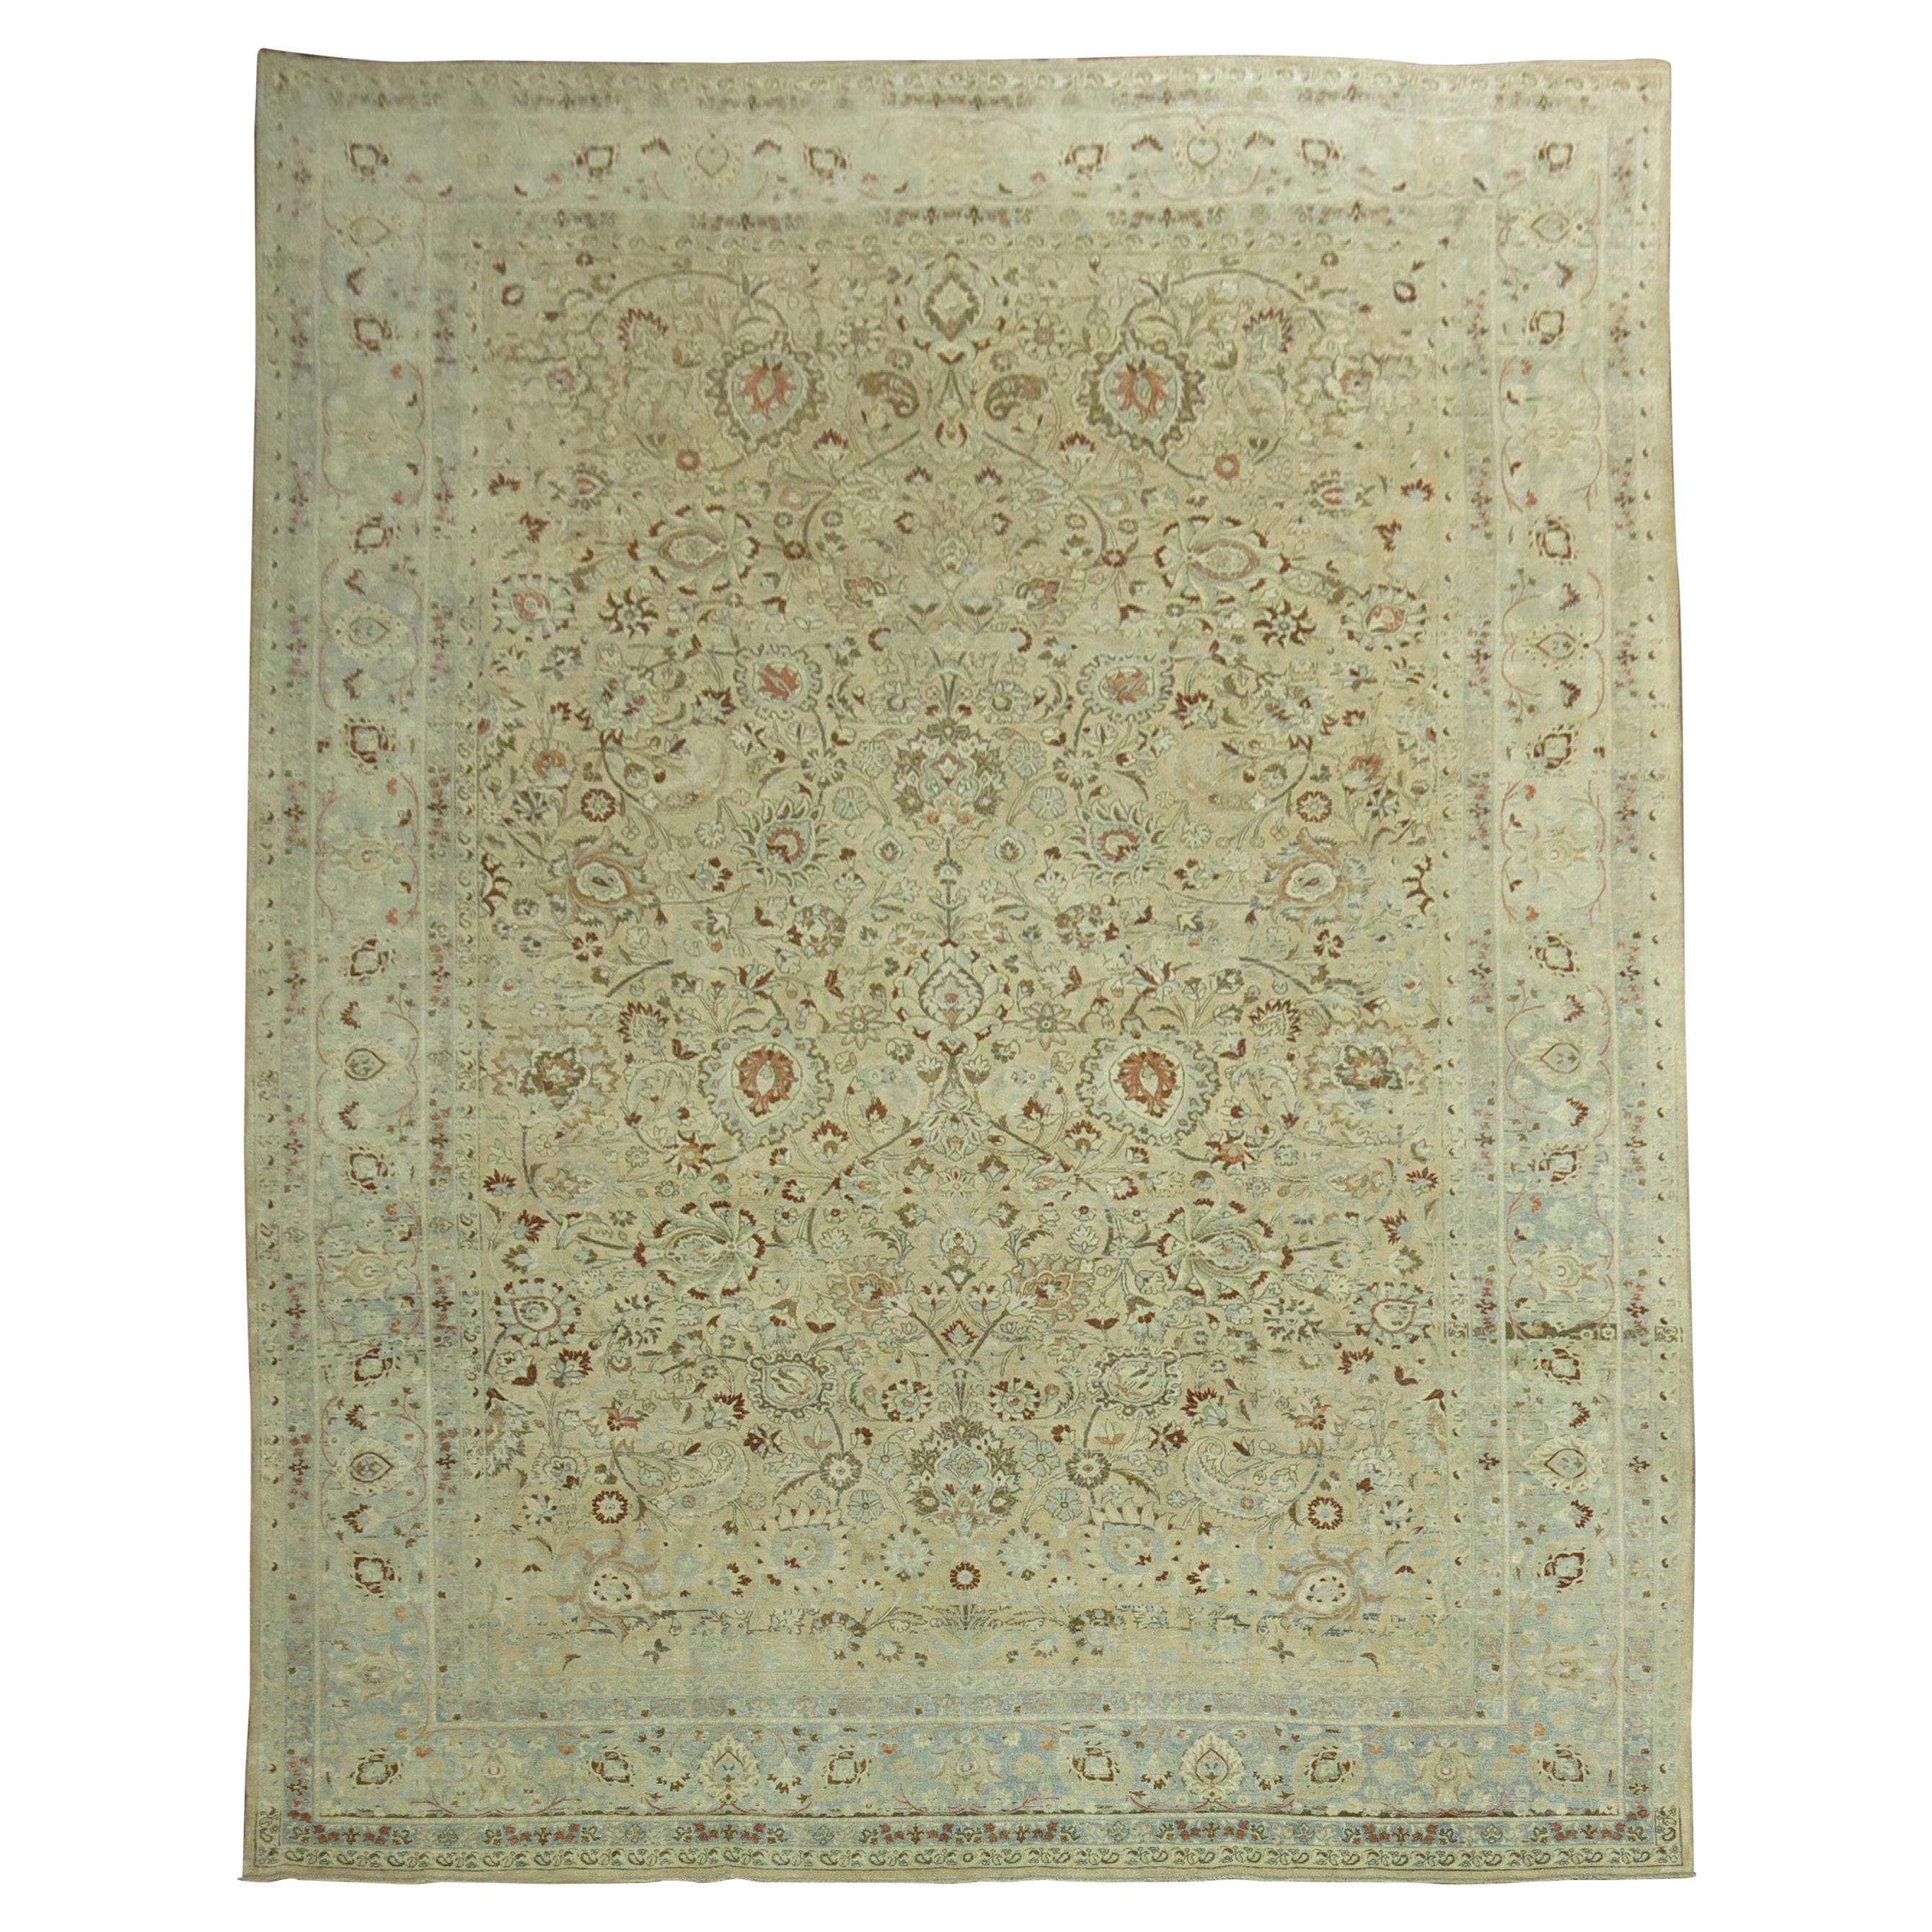 Stunning Tan Icy Blue Antique Persian Formal Meshed Rug, 20th Century